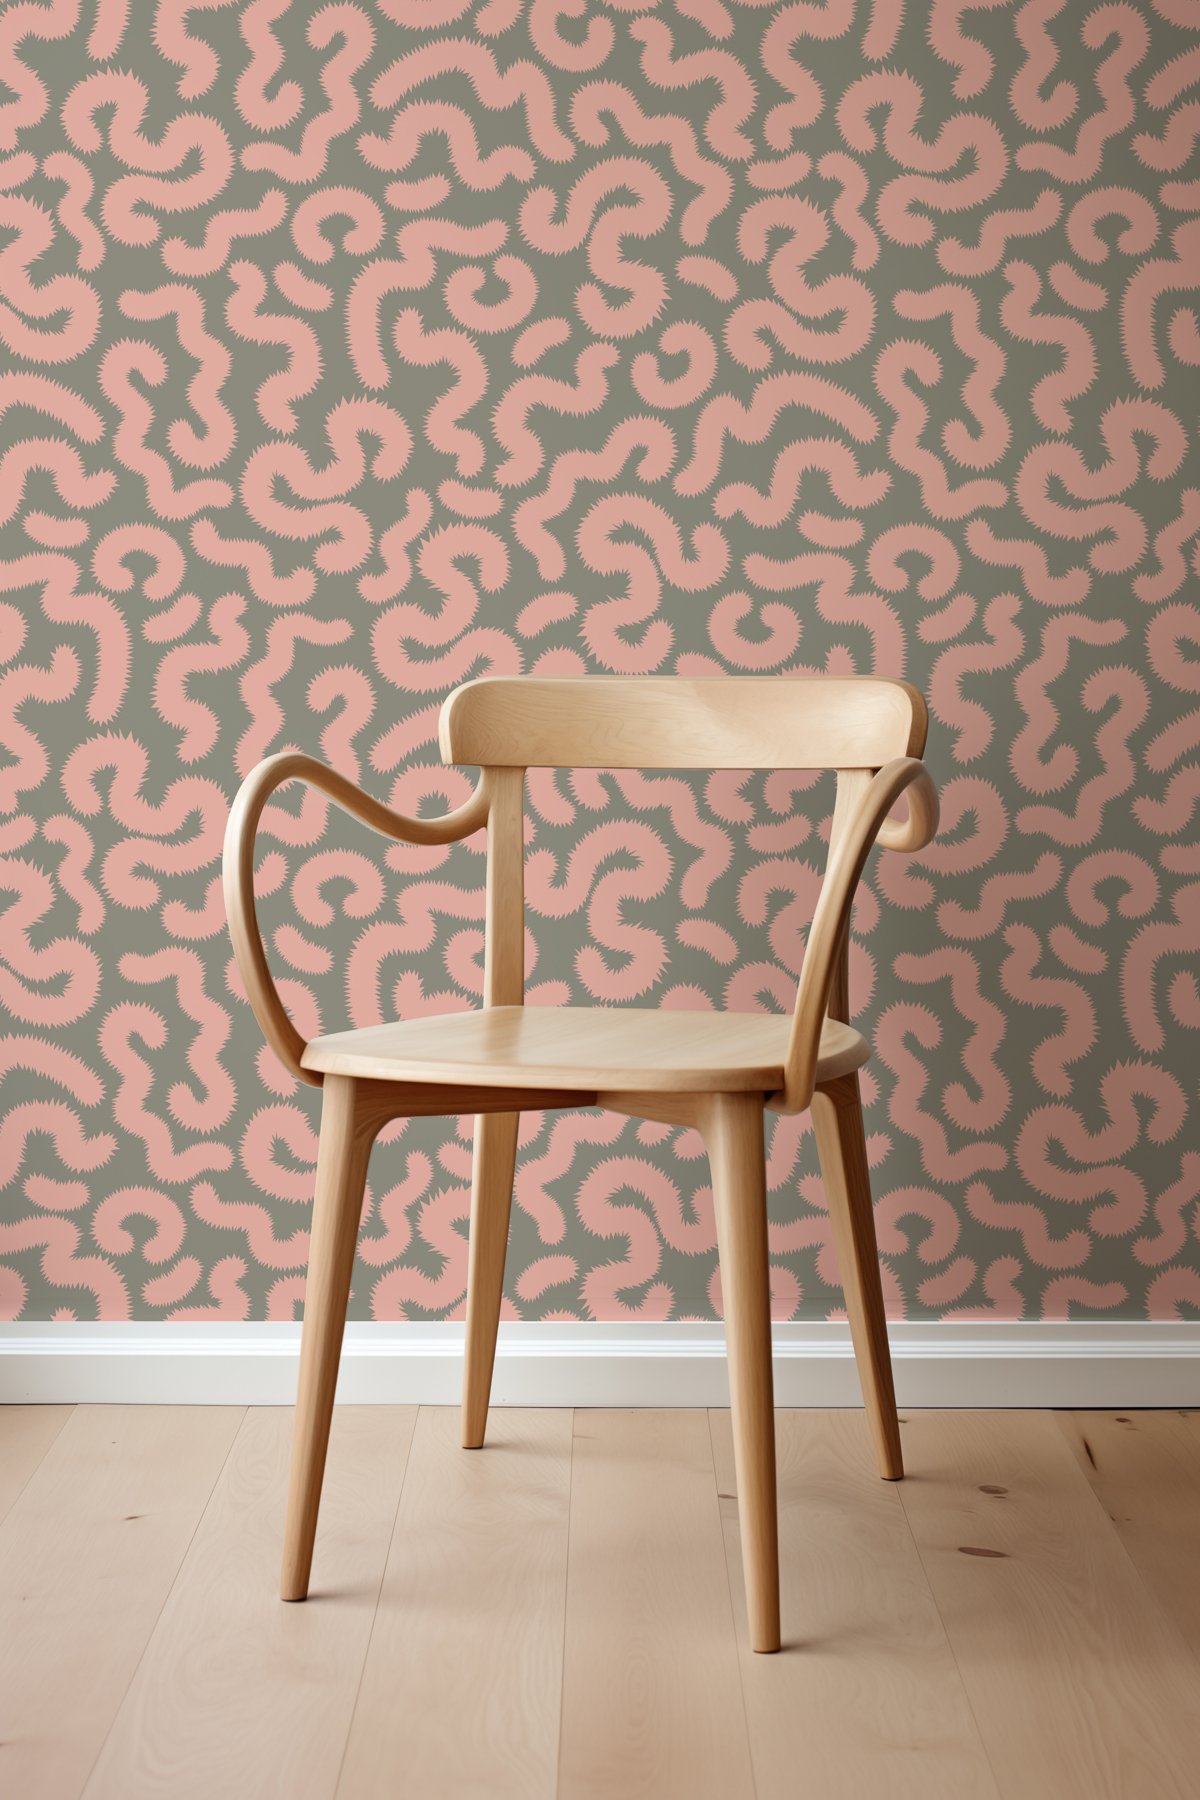 Kate Golding Spring Pop (Pink and Khaki) Wallpaper.  Modern wallcoverings and interior decor.